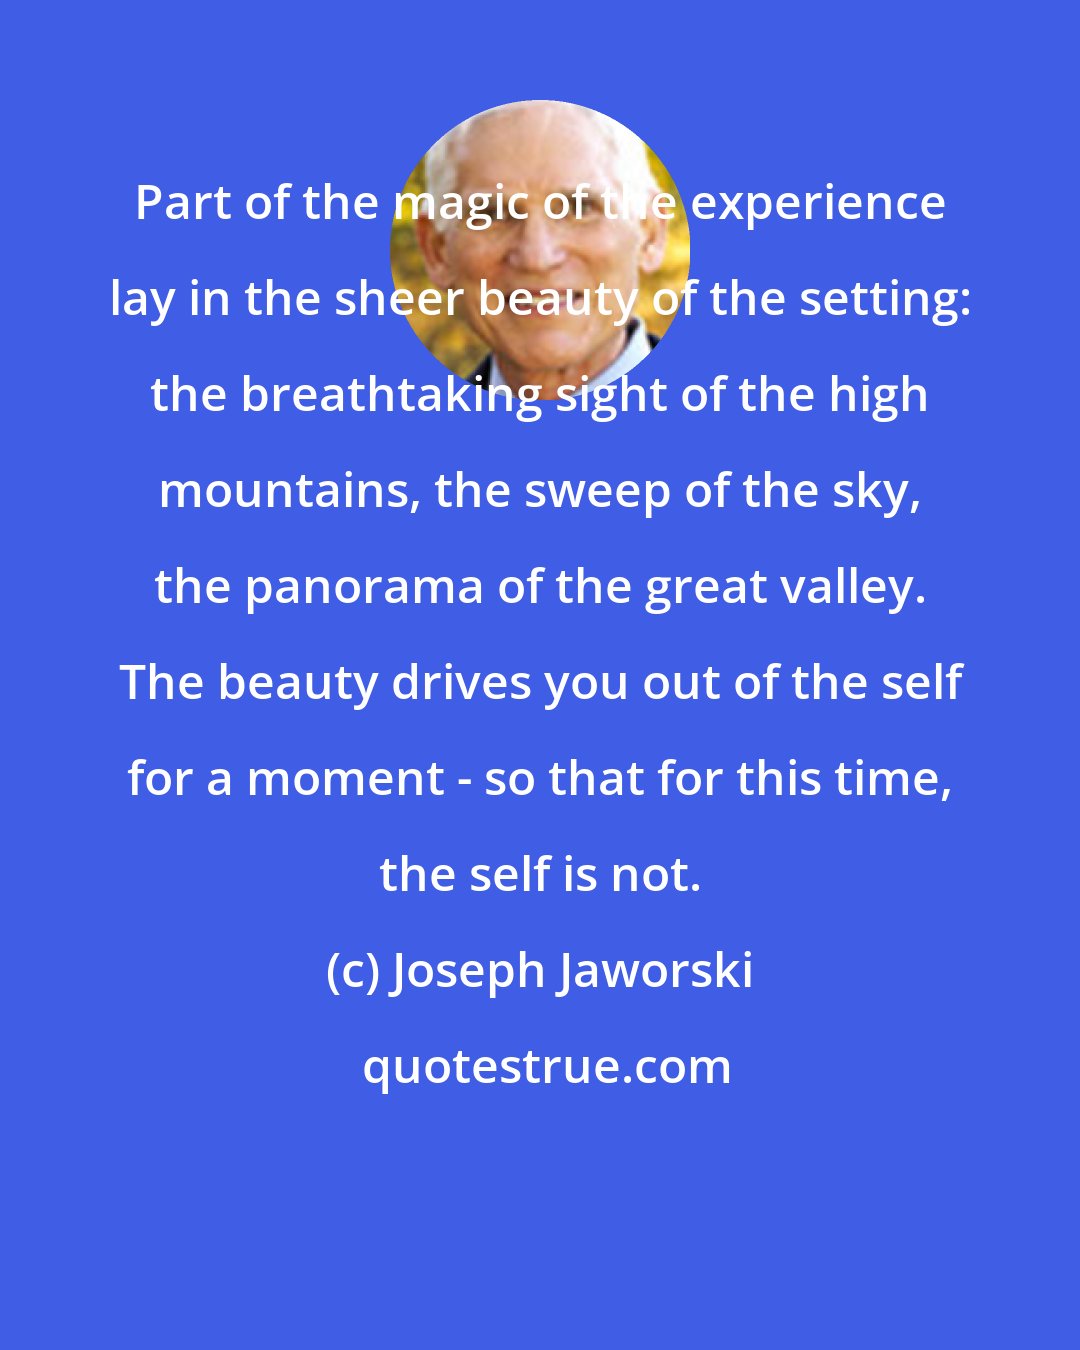 Joseph Jaworski: Part of the magic of the experience lay in the sheer beauty of the setting: the breathtaking sight of the high mountains, the sweep of the sky, the panorama of the great valley. The beauty drives you out of the self for a moment - so that for this time, the self is not.